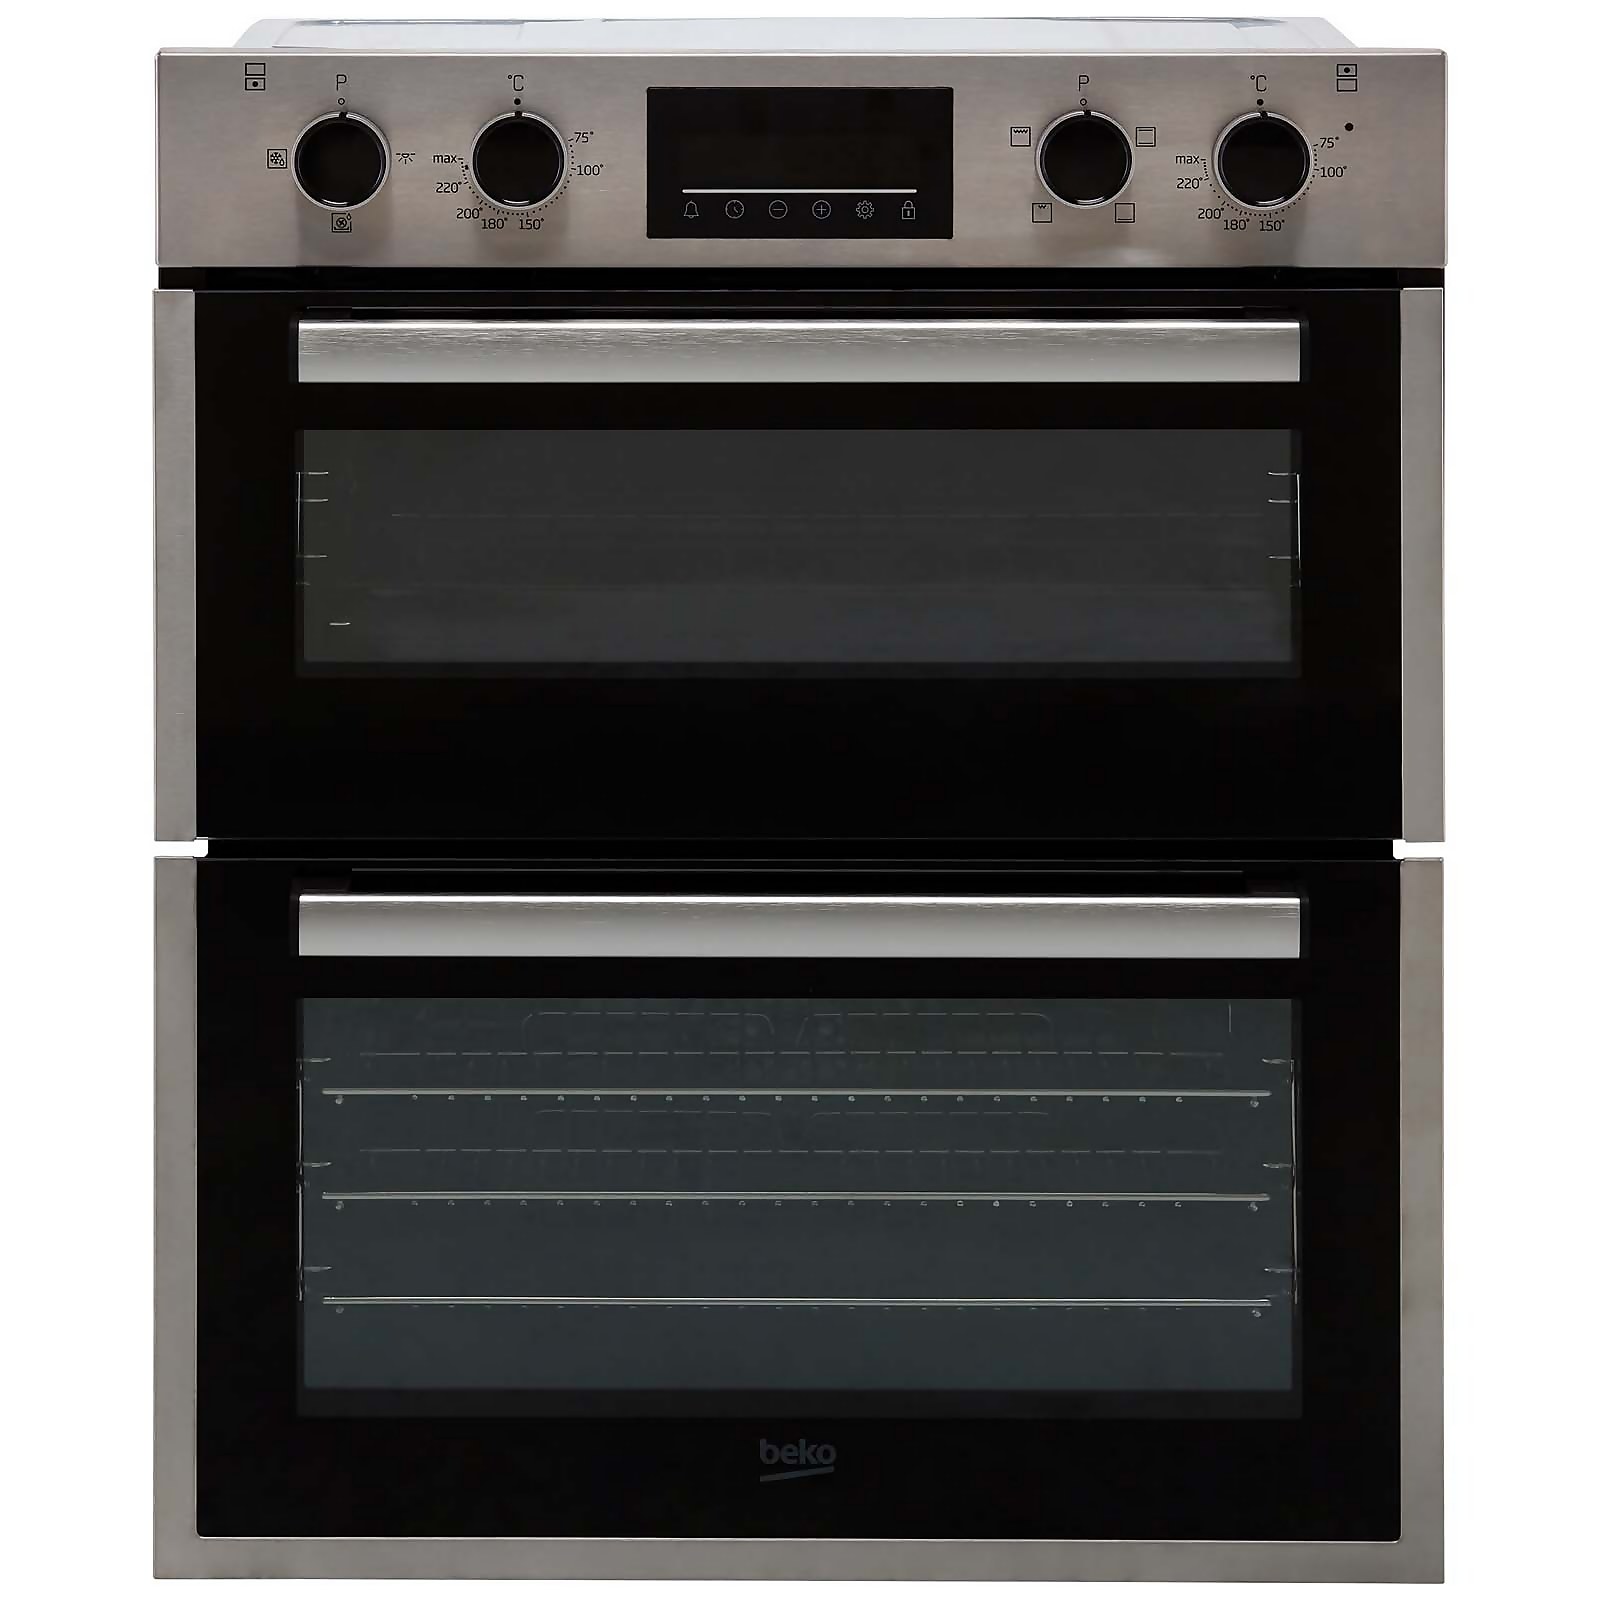 Photo of Beko Recyclednet™ Bbtf26300x Built Under Electric Double Oven - Stainless Steel - A/a Rated